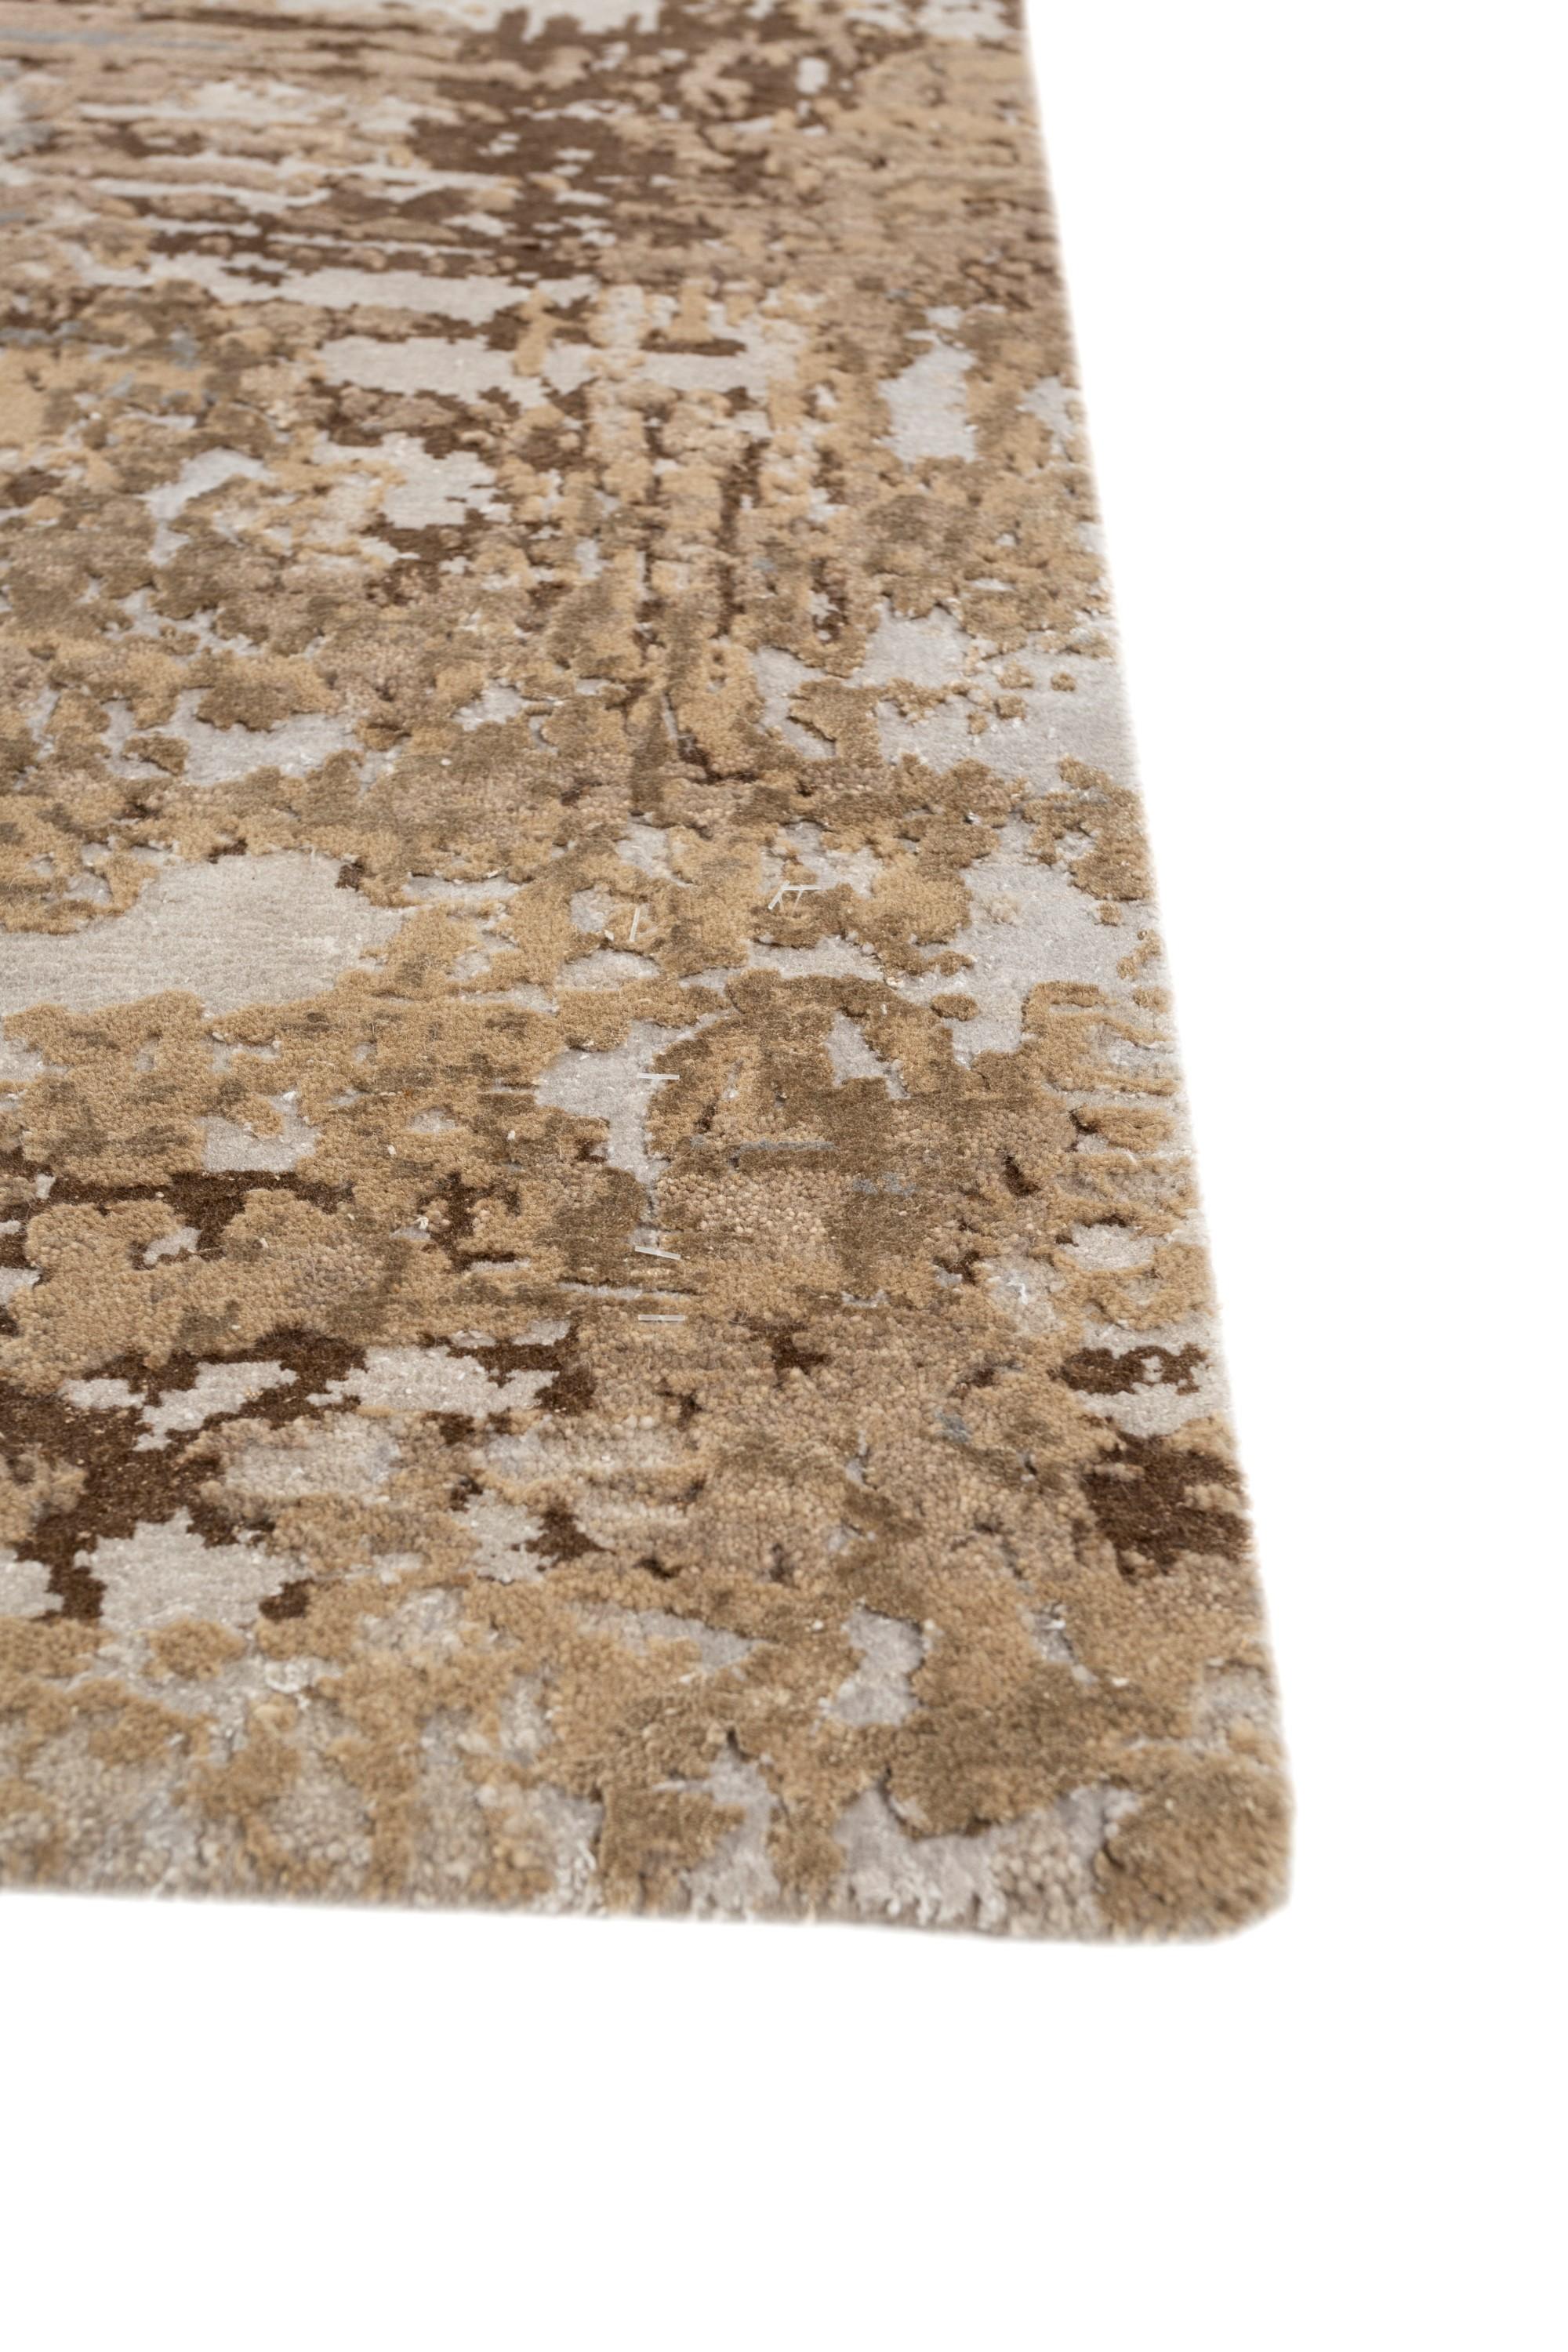 Introducing this hand-knotted rug in mink and classic gray colors with a modern design that finds beauty in errors. Inspired by nature's interruption of mechanical duplication, this rug is a unique piece of art, showcasing spontaneous and